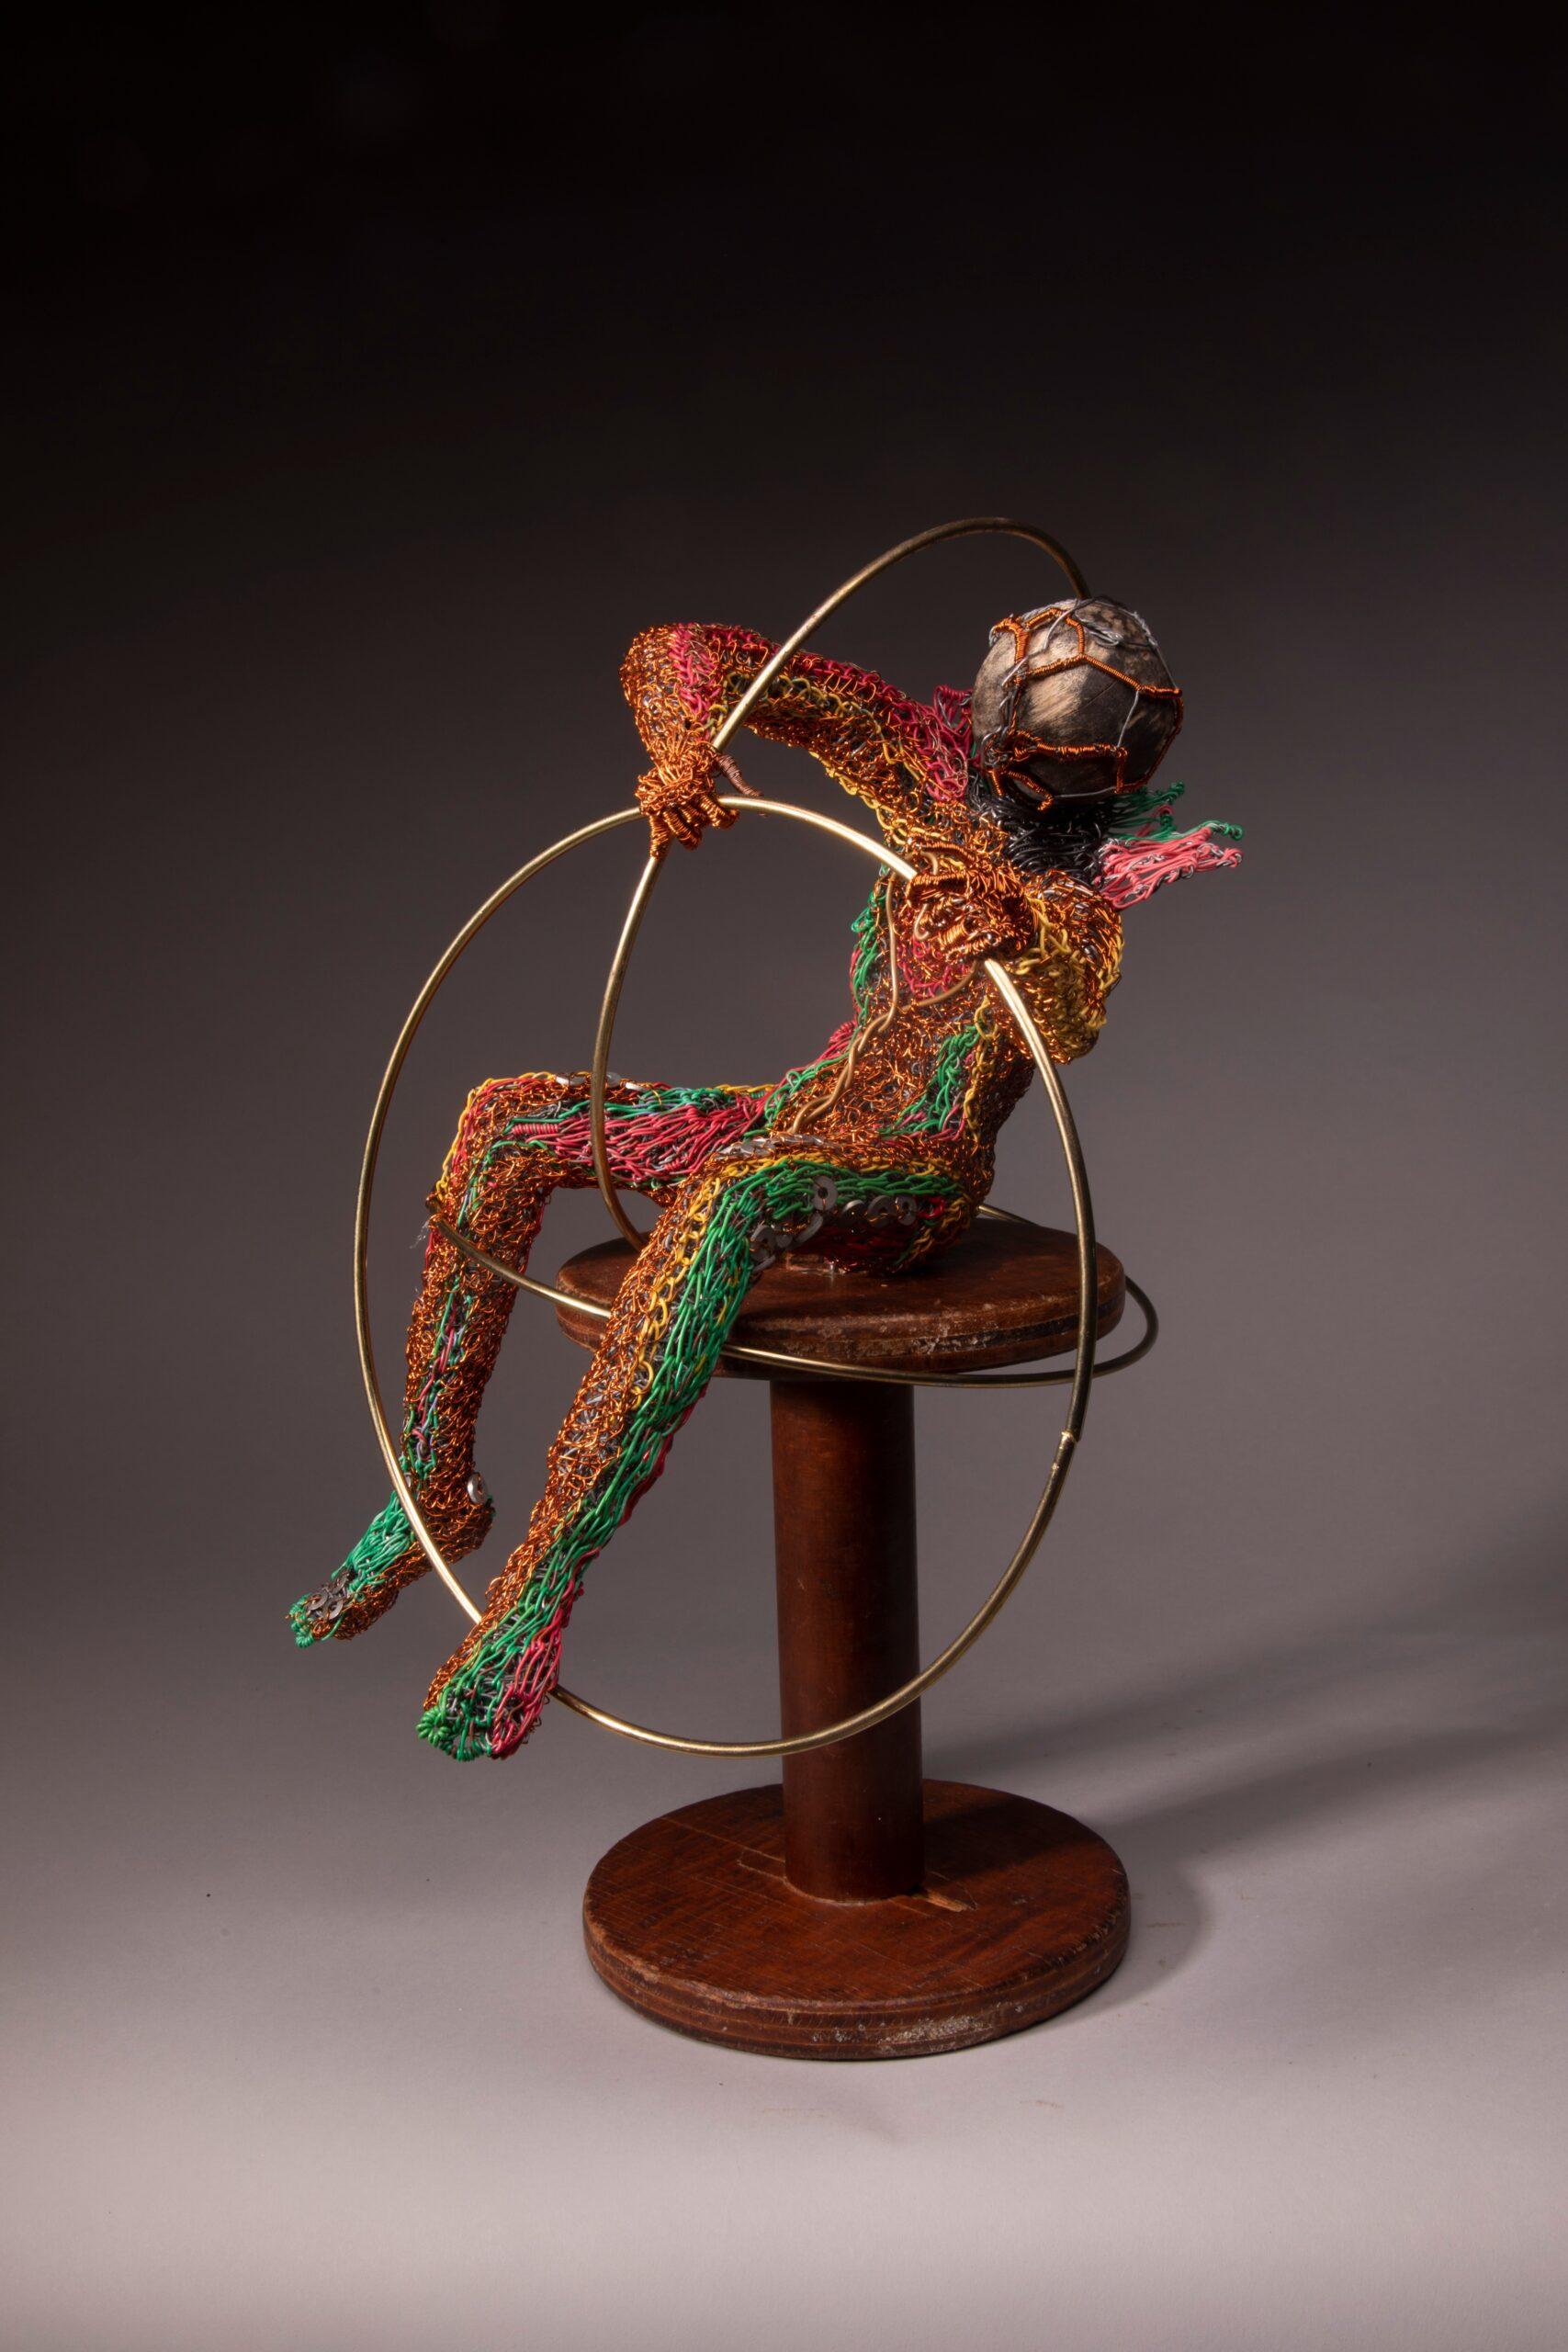 Three-Ring Pandemic Circus - Living With These Changes by Fay Wood - Sculpture by Unknown